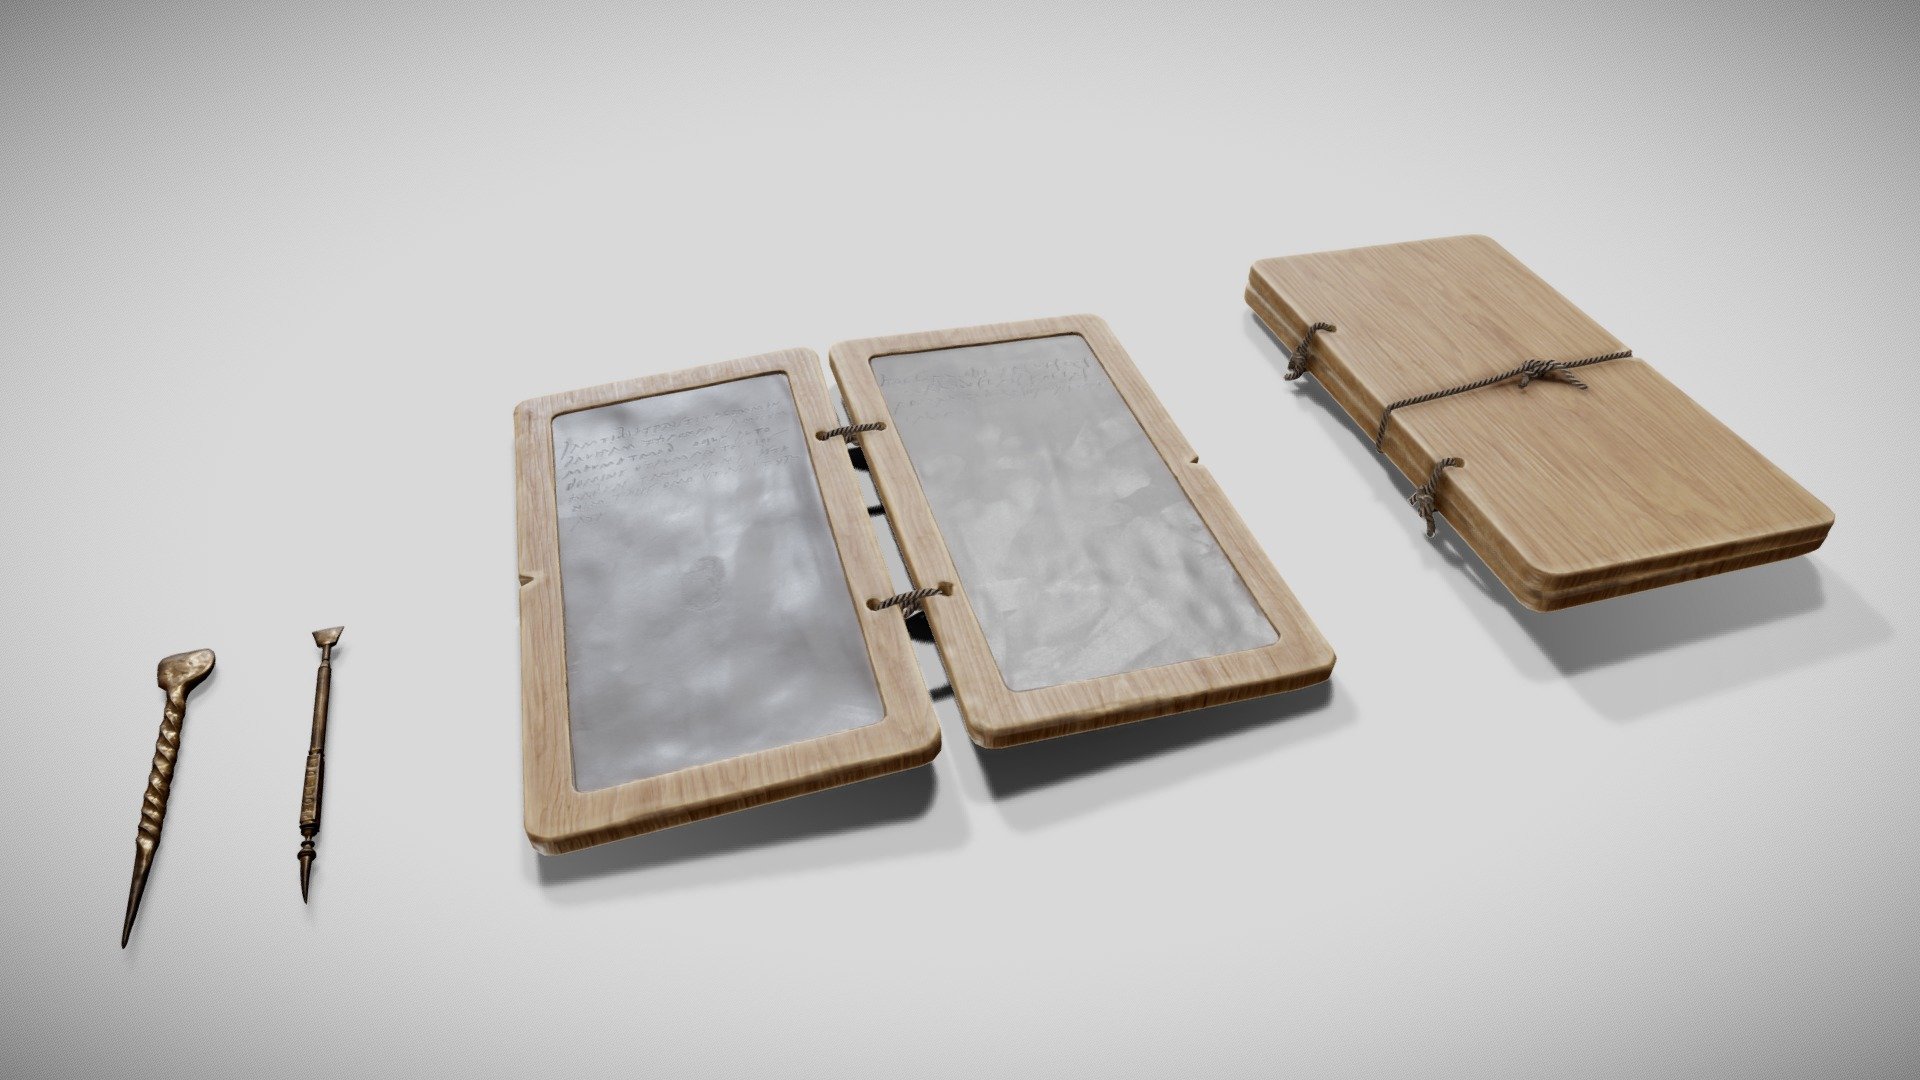 Want to give your renders an historically accurate touch? Here is an ancient writing set based on real artefacts found by archaeologists.
This kind of set composed of wax tablets and styluses was widely used during Antiquity, Middle Ages and Renaissance because it was reusable and way cheaper than paper, papyrus or parchment . Wax tablets were used as notebooks, to send messages, to do calculations, to learn to write..

**What's inside? **




Stylus 1 : Bronze, based on a real medieval object (14th century)

Stylus 2 : Bronzed, base on a real roman object (1st century B.C 3d model